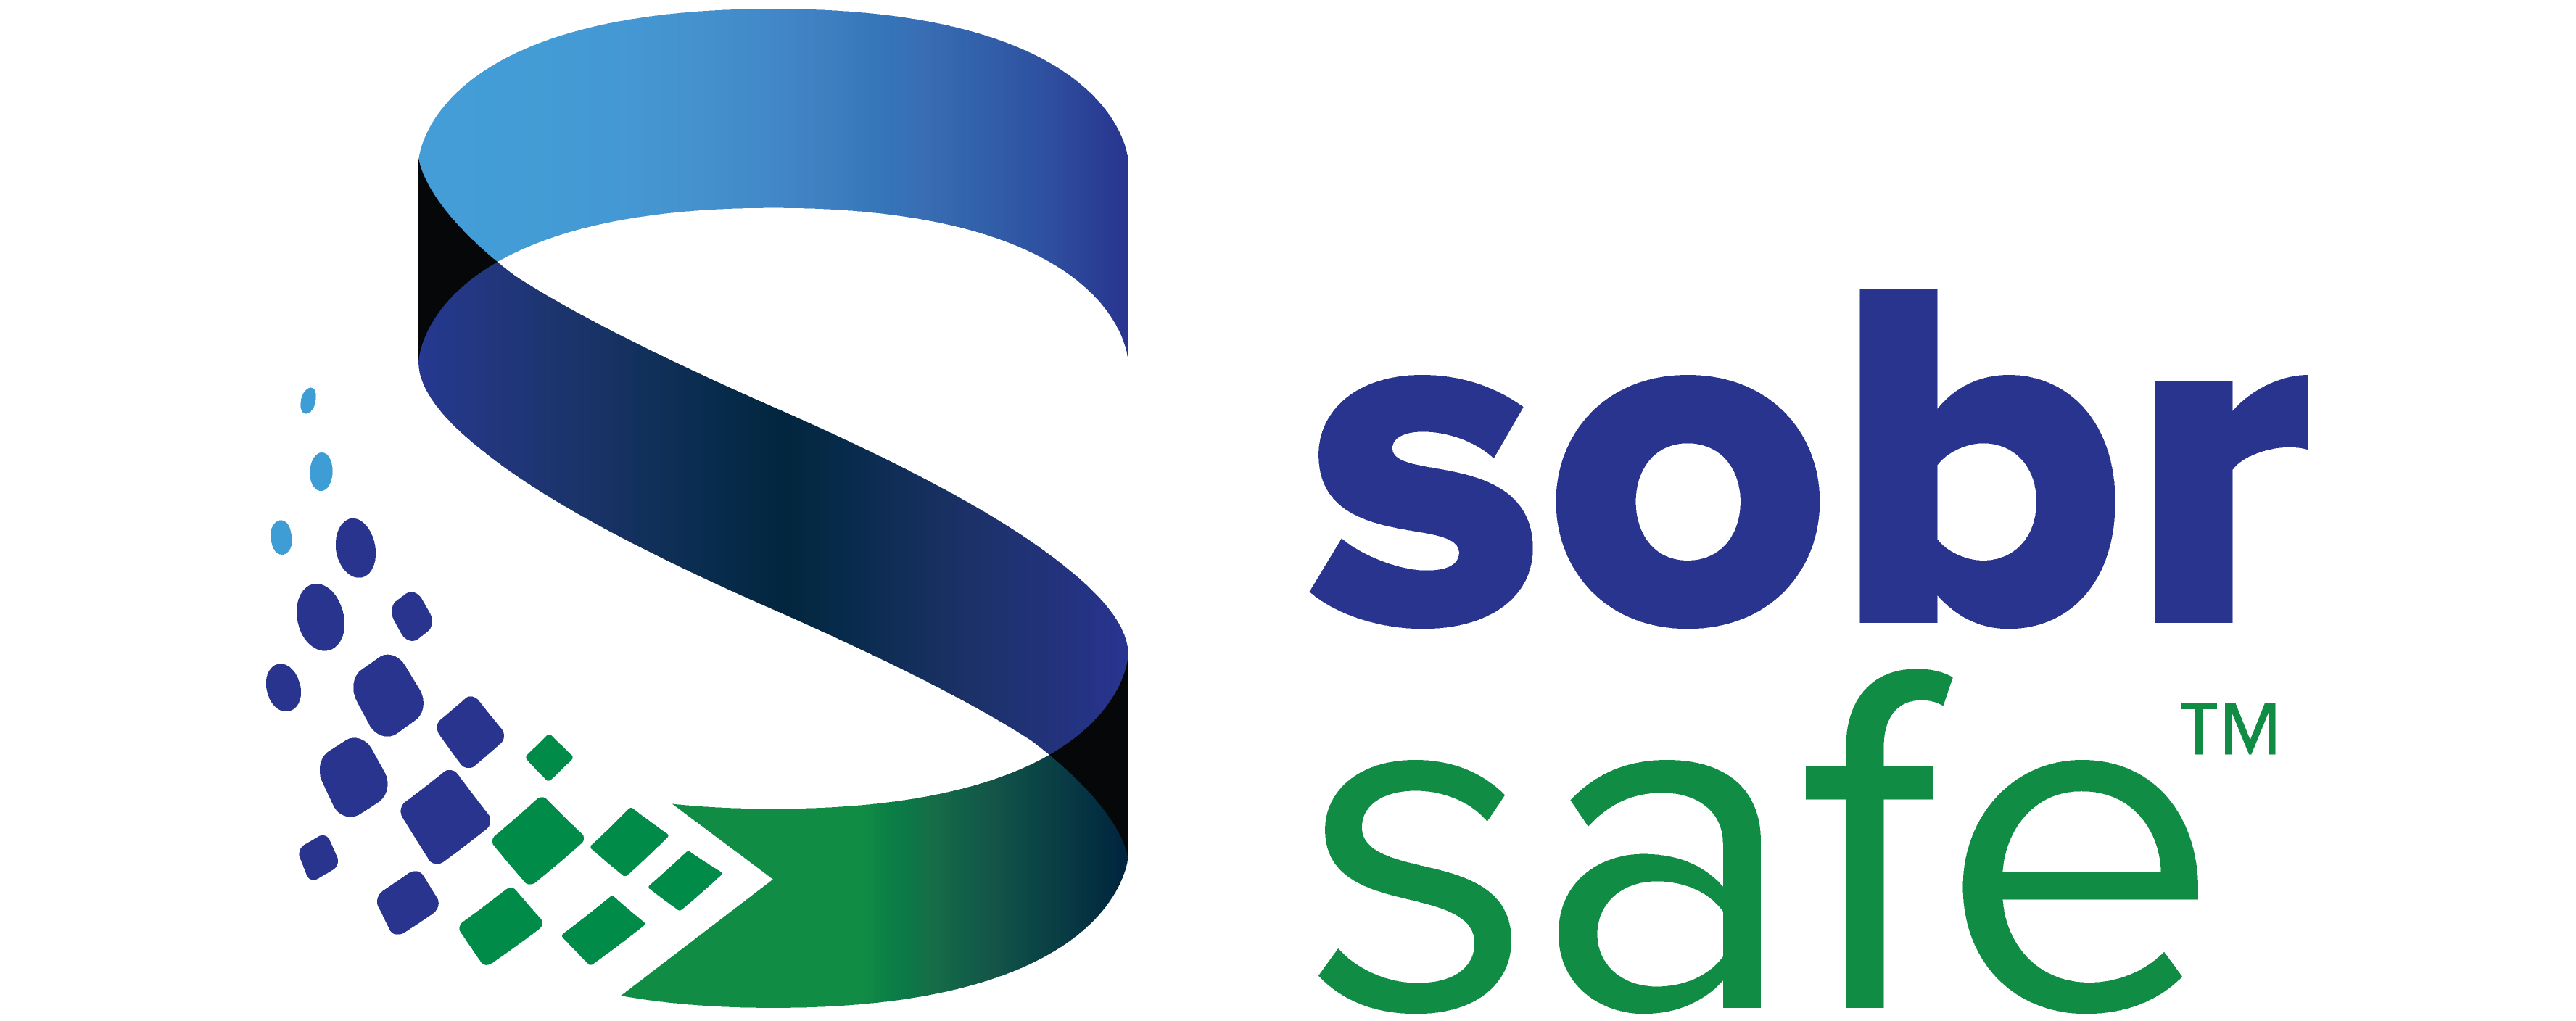 SOBR Safe Inc. Disrupts The Alcohol-Detection Landscape With Game-Changing Finger-Touch Screening Technology ($SOBR)